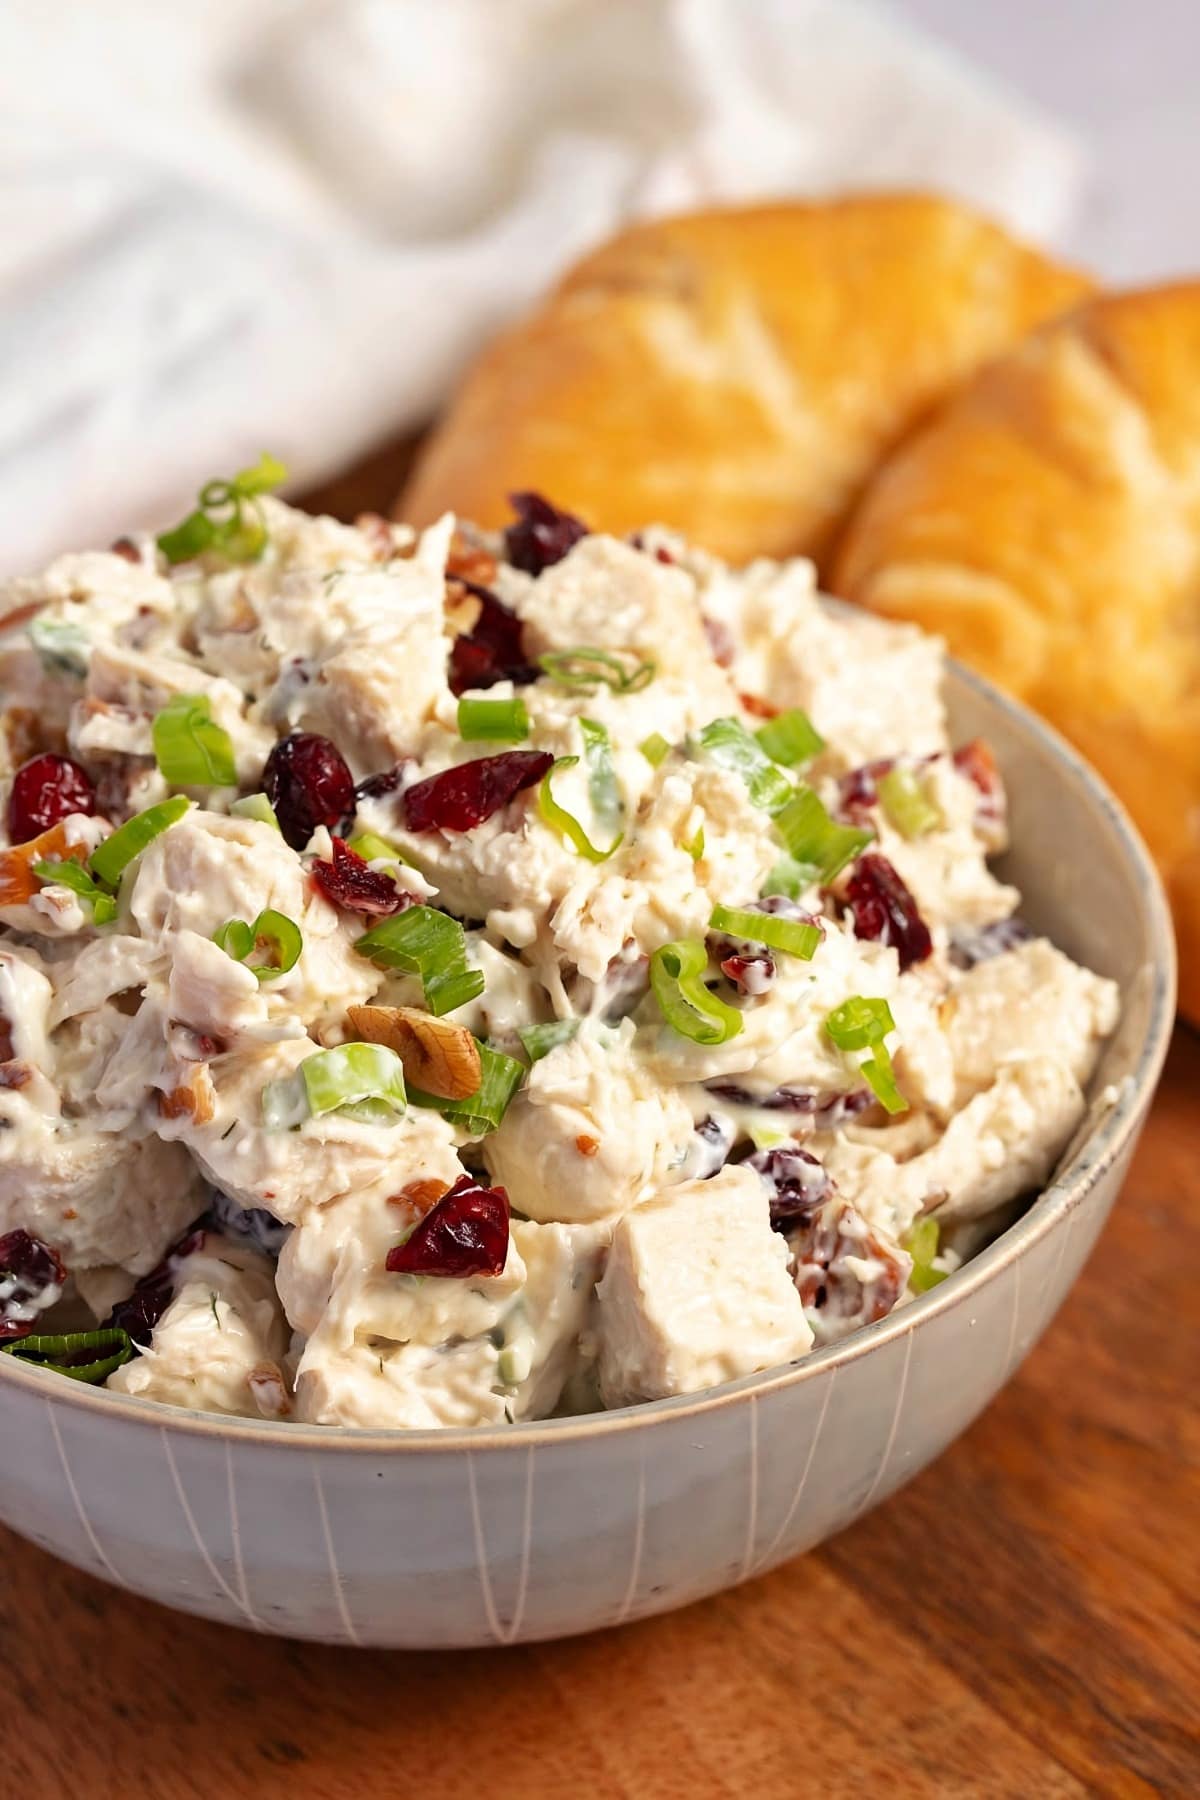 Creamy and Tangy Cranberry Chicken Salad with Green Onions Served with Bread